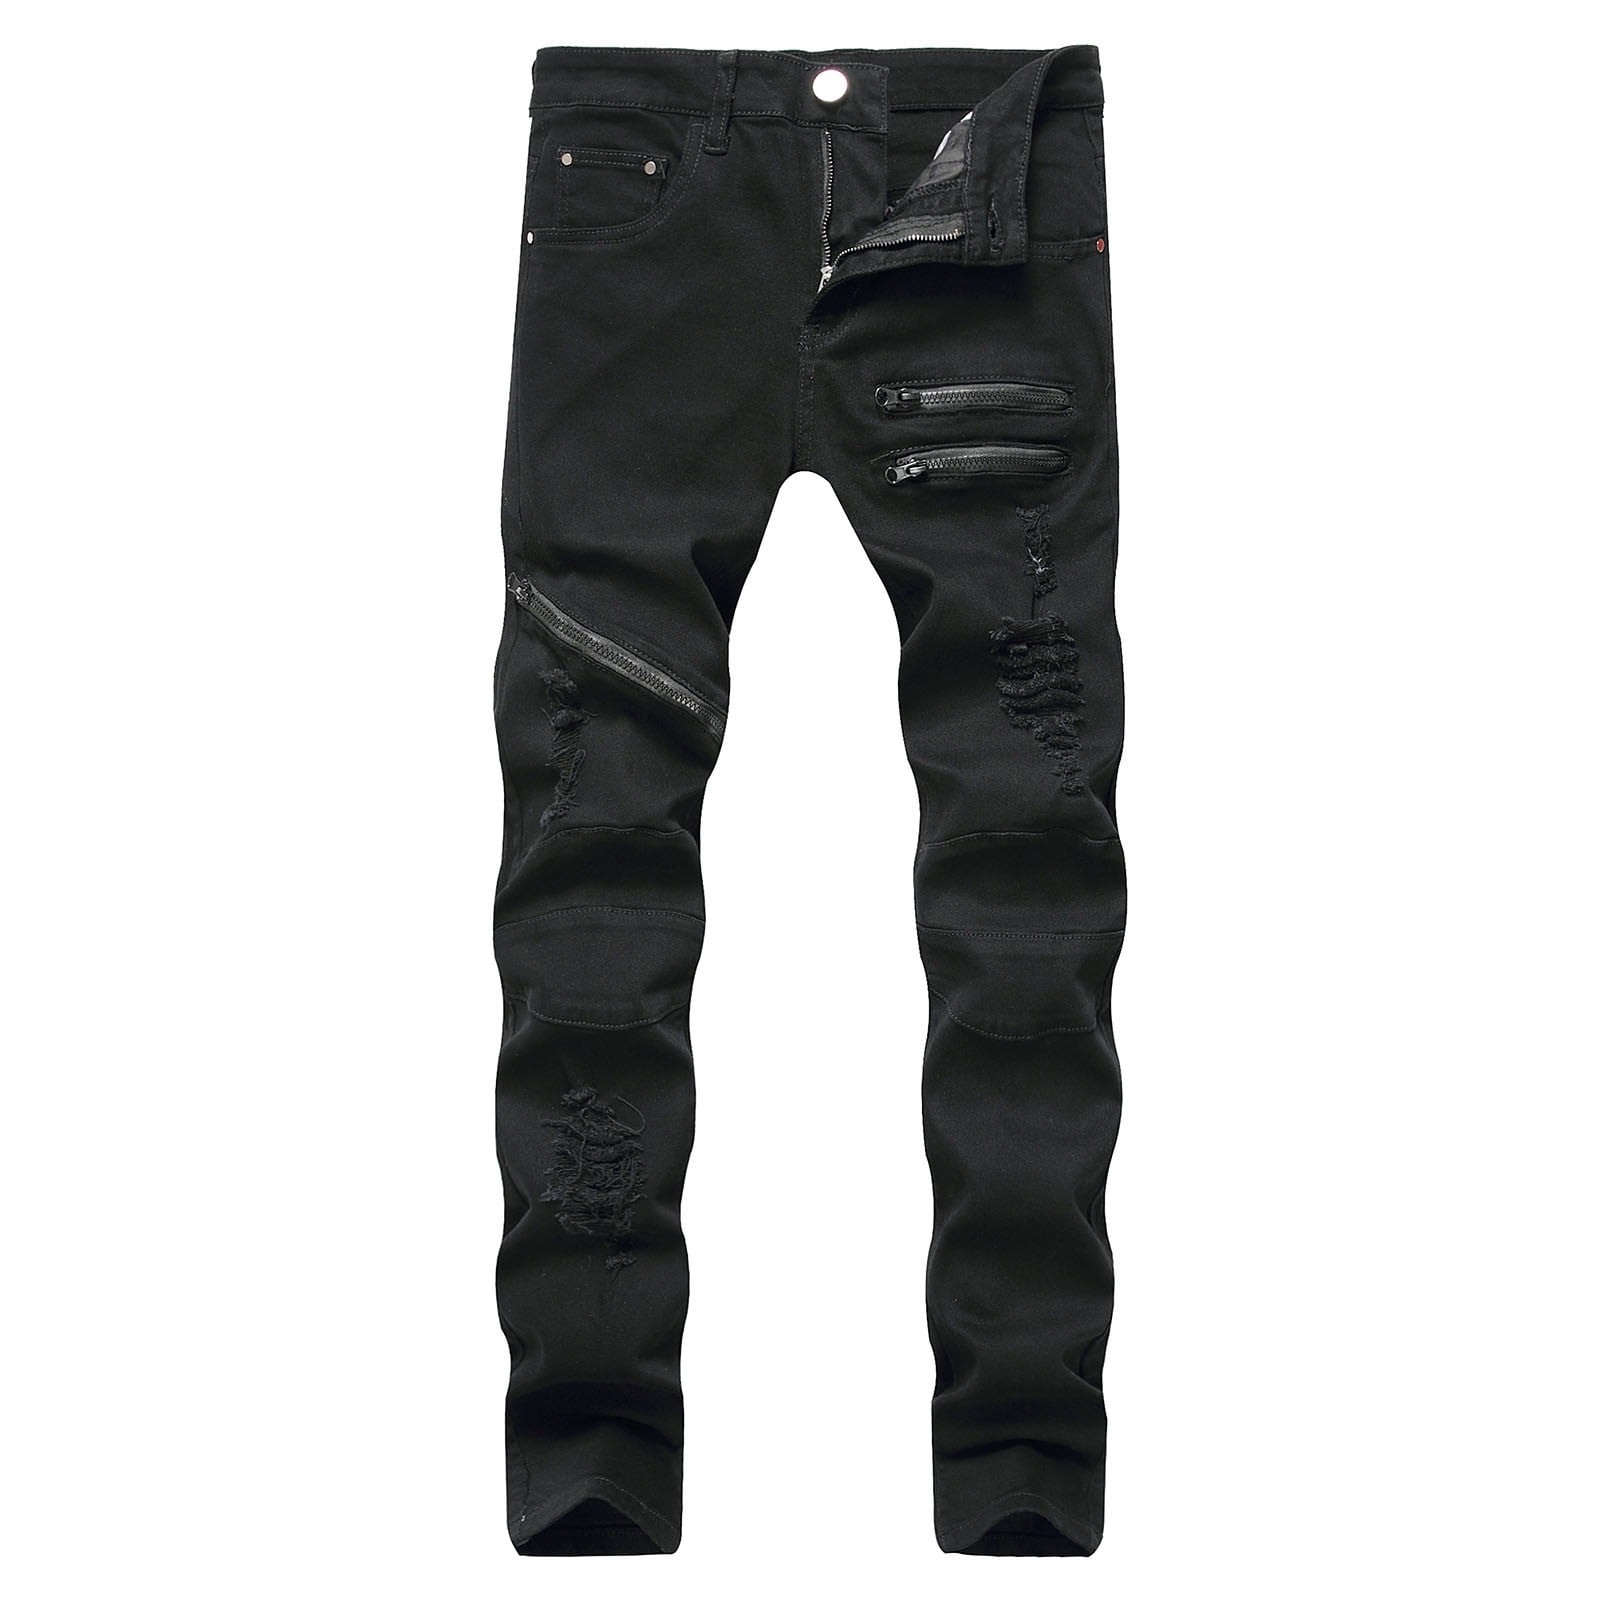 Mens Jeans Clearance Reduced Price Men's New Tight-fitting Ripped ...